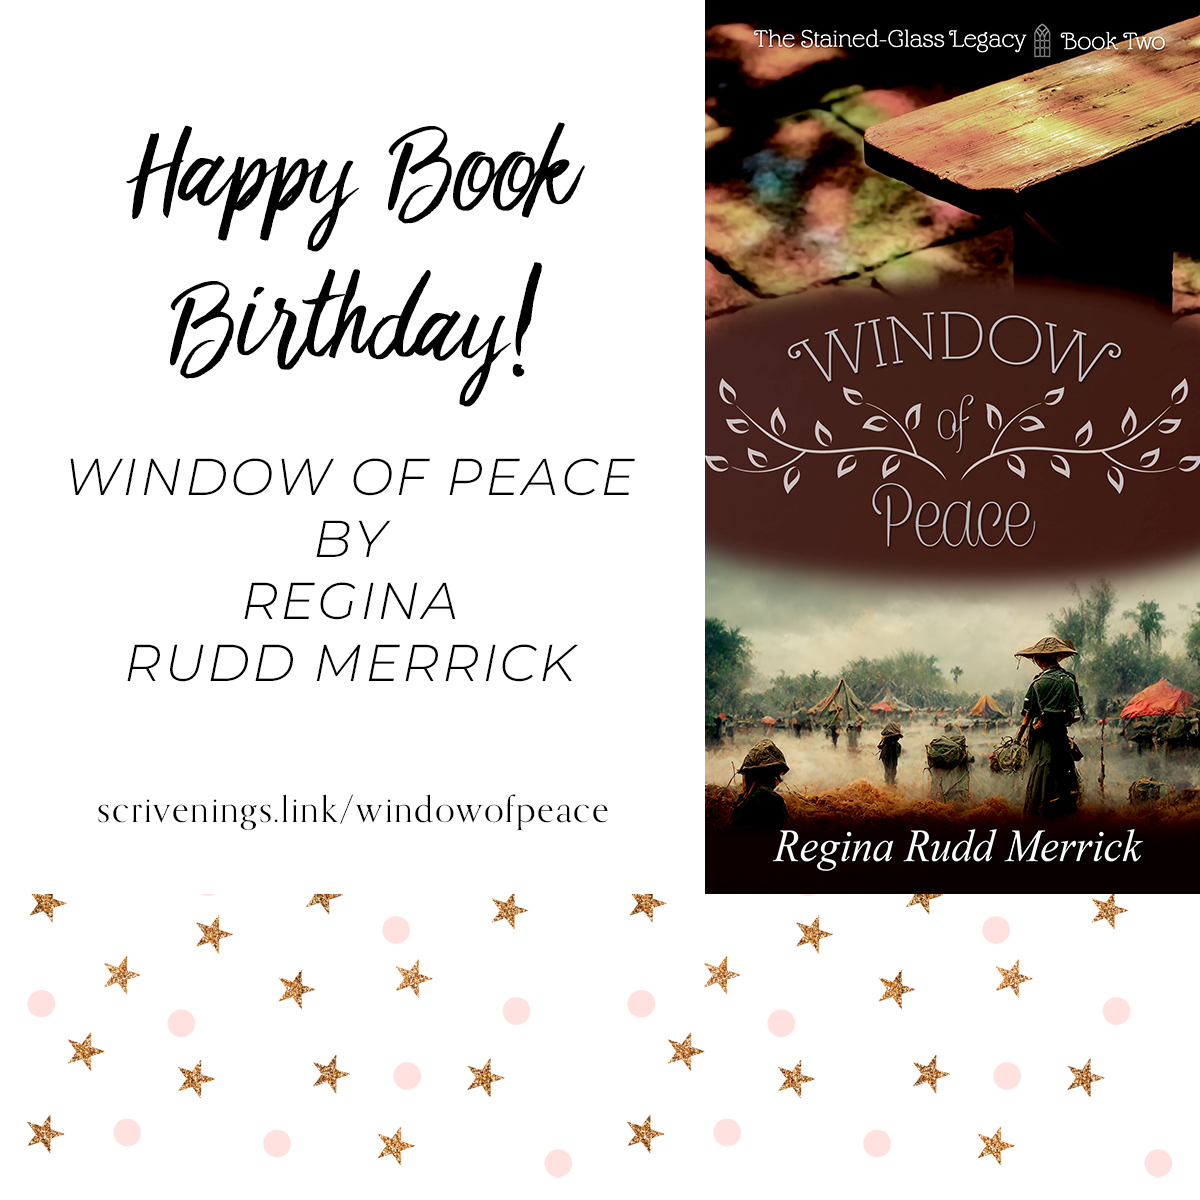 Happy Book Birthday to Regina Merrick upon the release of her #historicalromance novel, Window of Peace.

scrivenings.link/windowofpeace

#Christianfiction #sweetromancereads

Available in paperback, eBook, and on #KindleUnlimited.
#cleanfiction #newrelease #KU